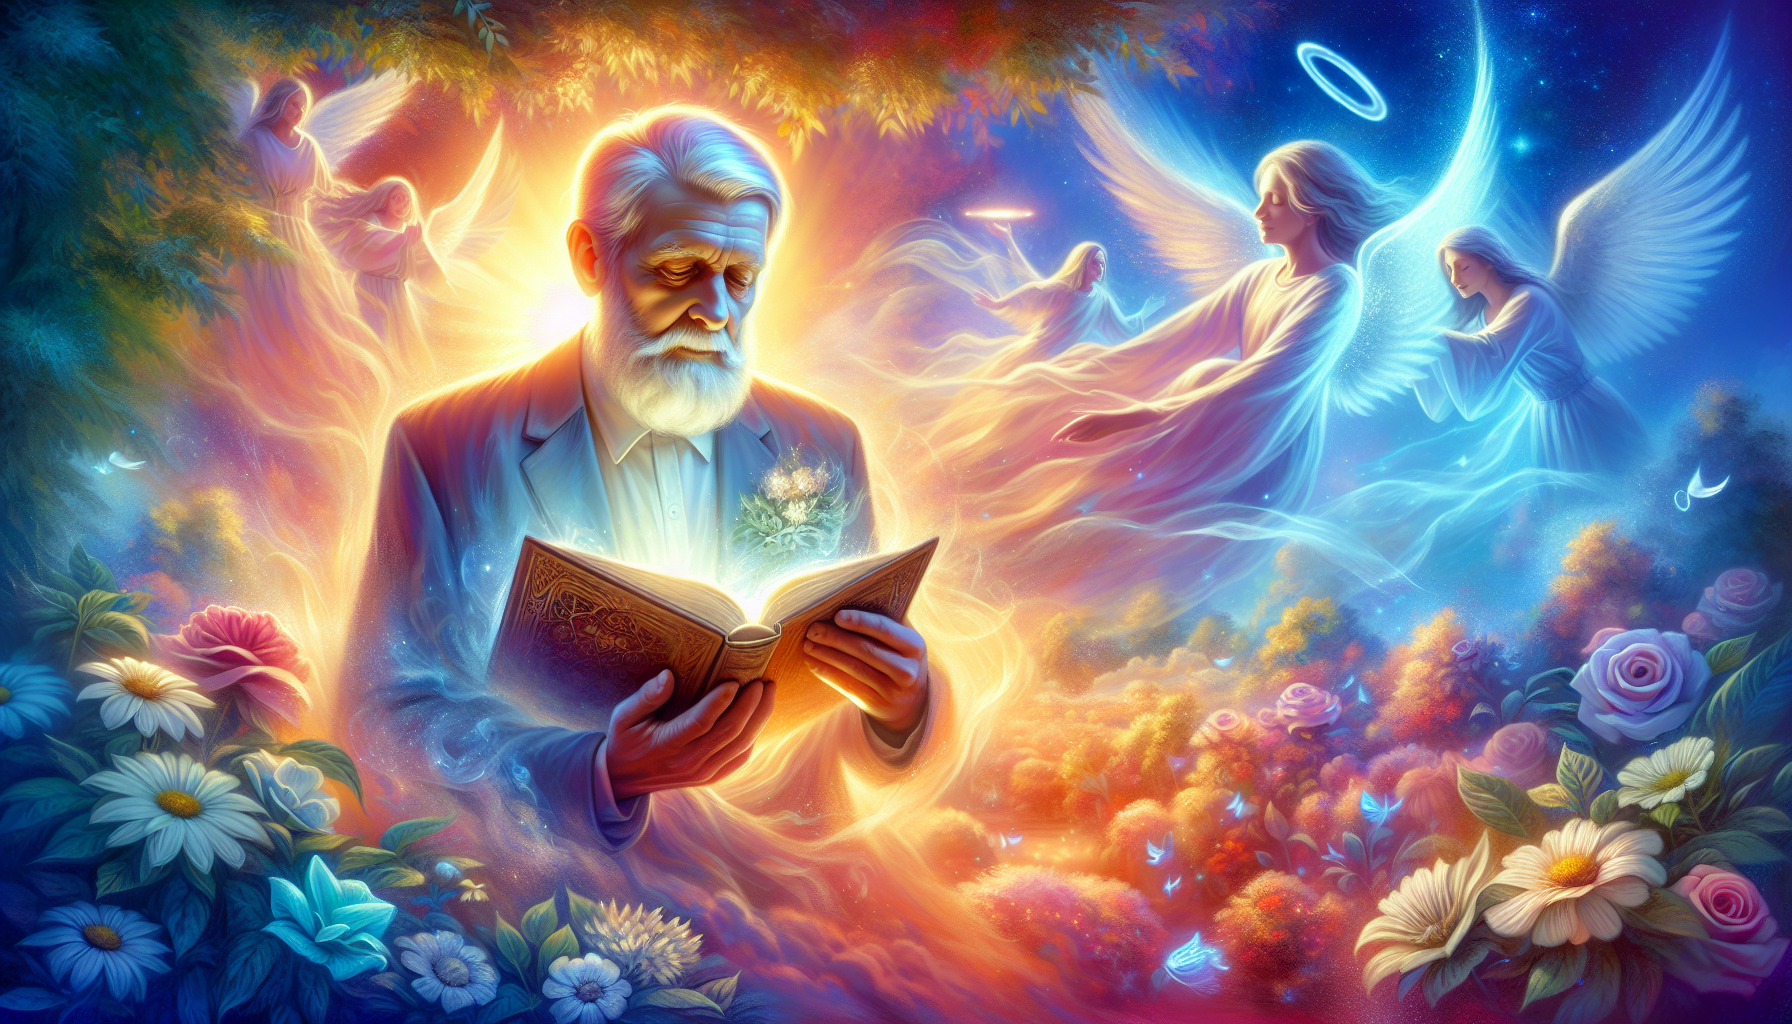 Create an illustration featuring an ethereal scene of an elderly man, Don, surrounded by a warm, divine light. He holds a glowing book that symbolizes wisdom, and angelic figures can be seen subtly in